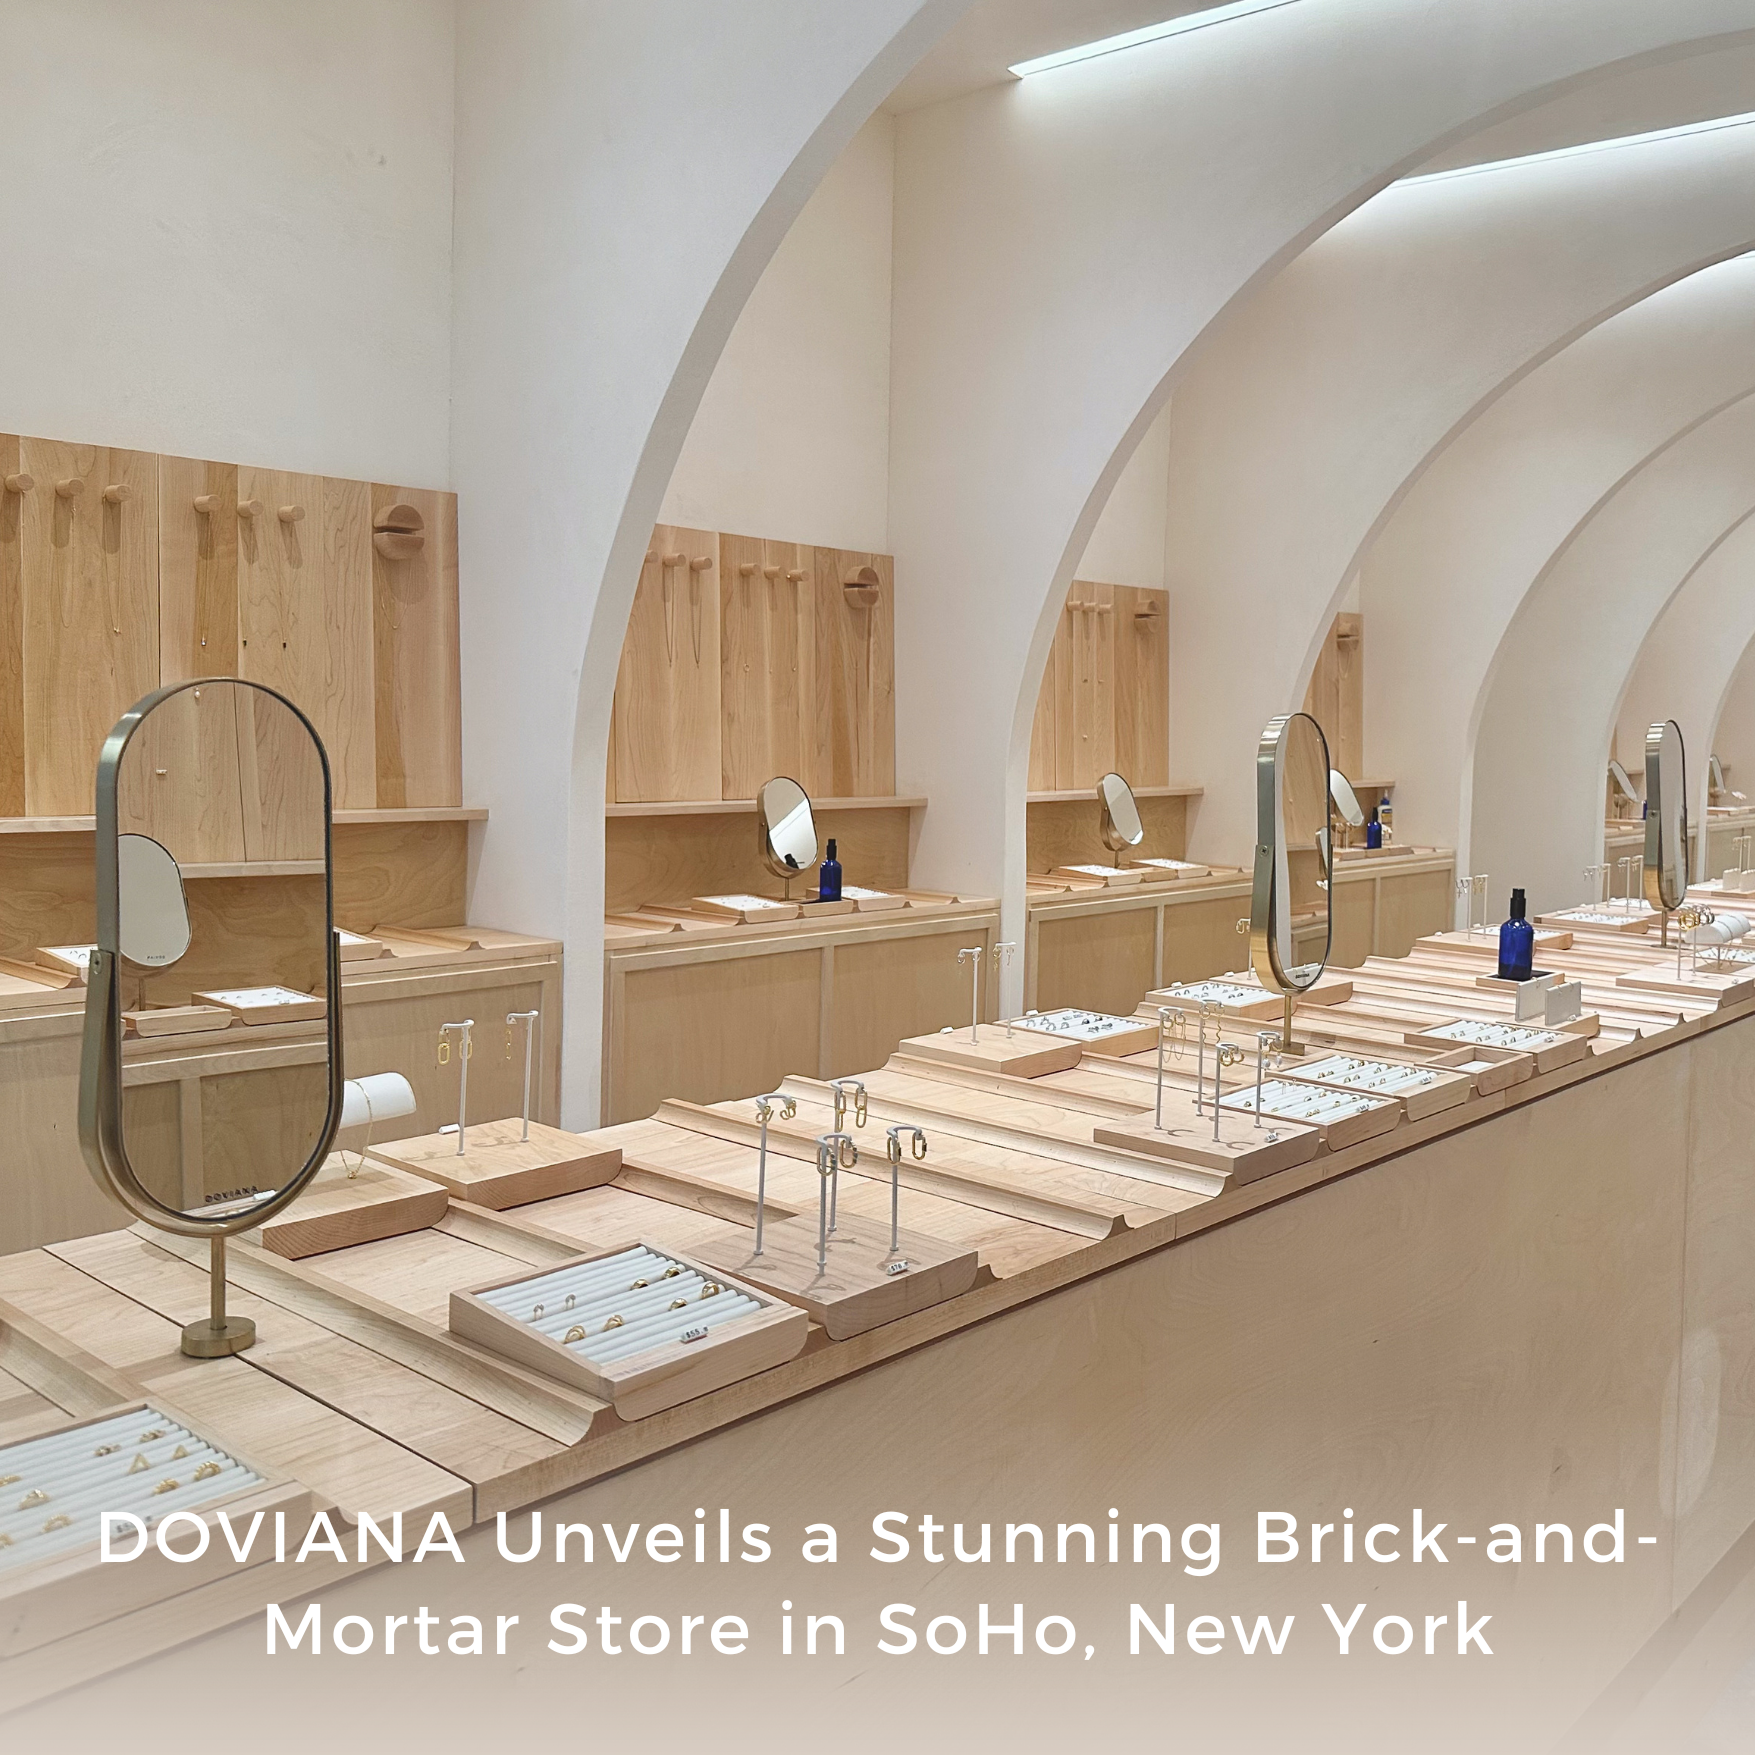 DOVIANA Unveils a Stunning Brick-and-Mortar Store in SoHo, New York